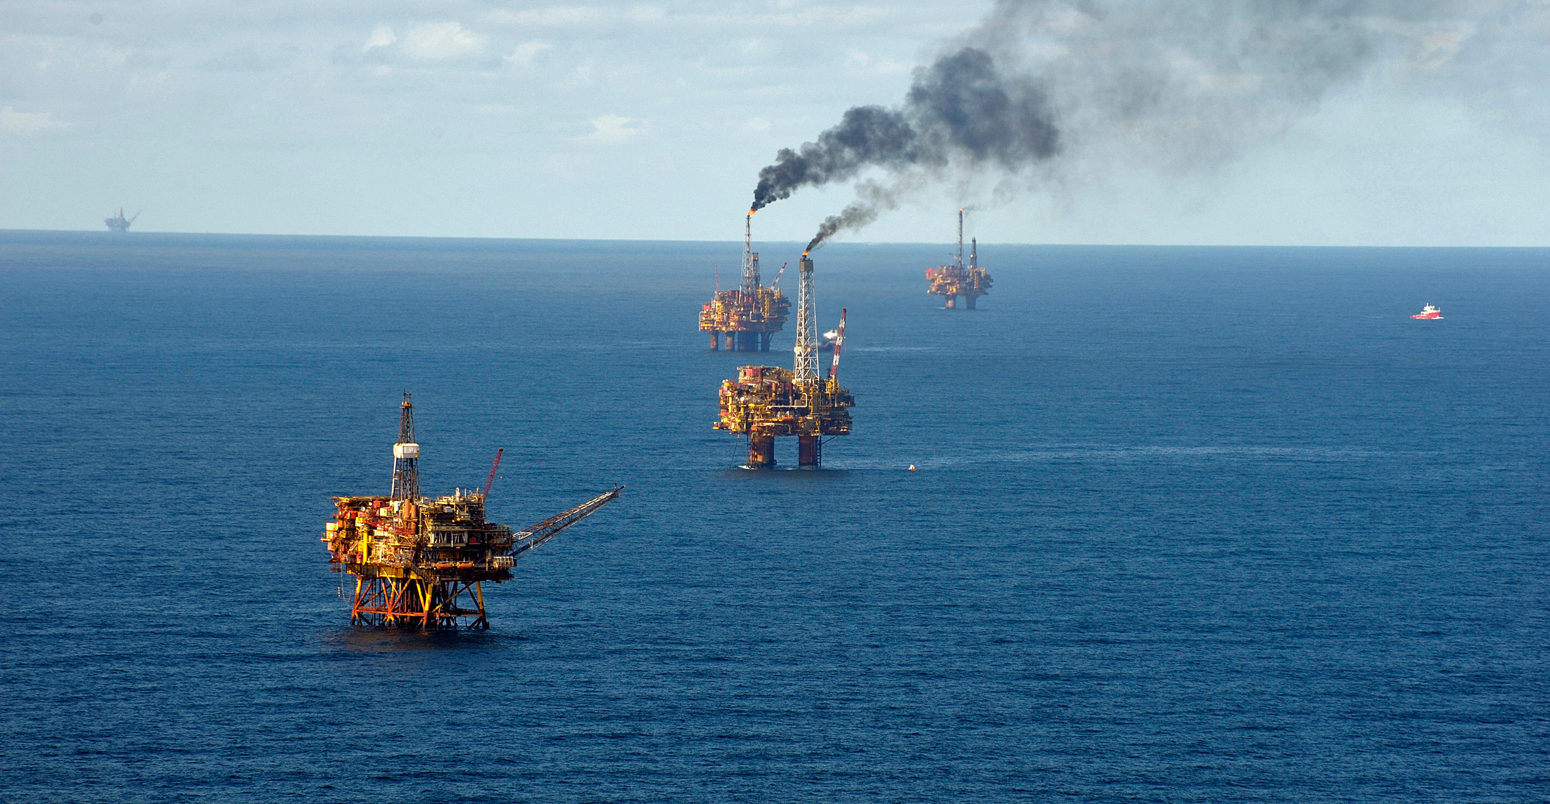 Oil platforms flaring in Brent Oil Field, North Sea